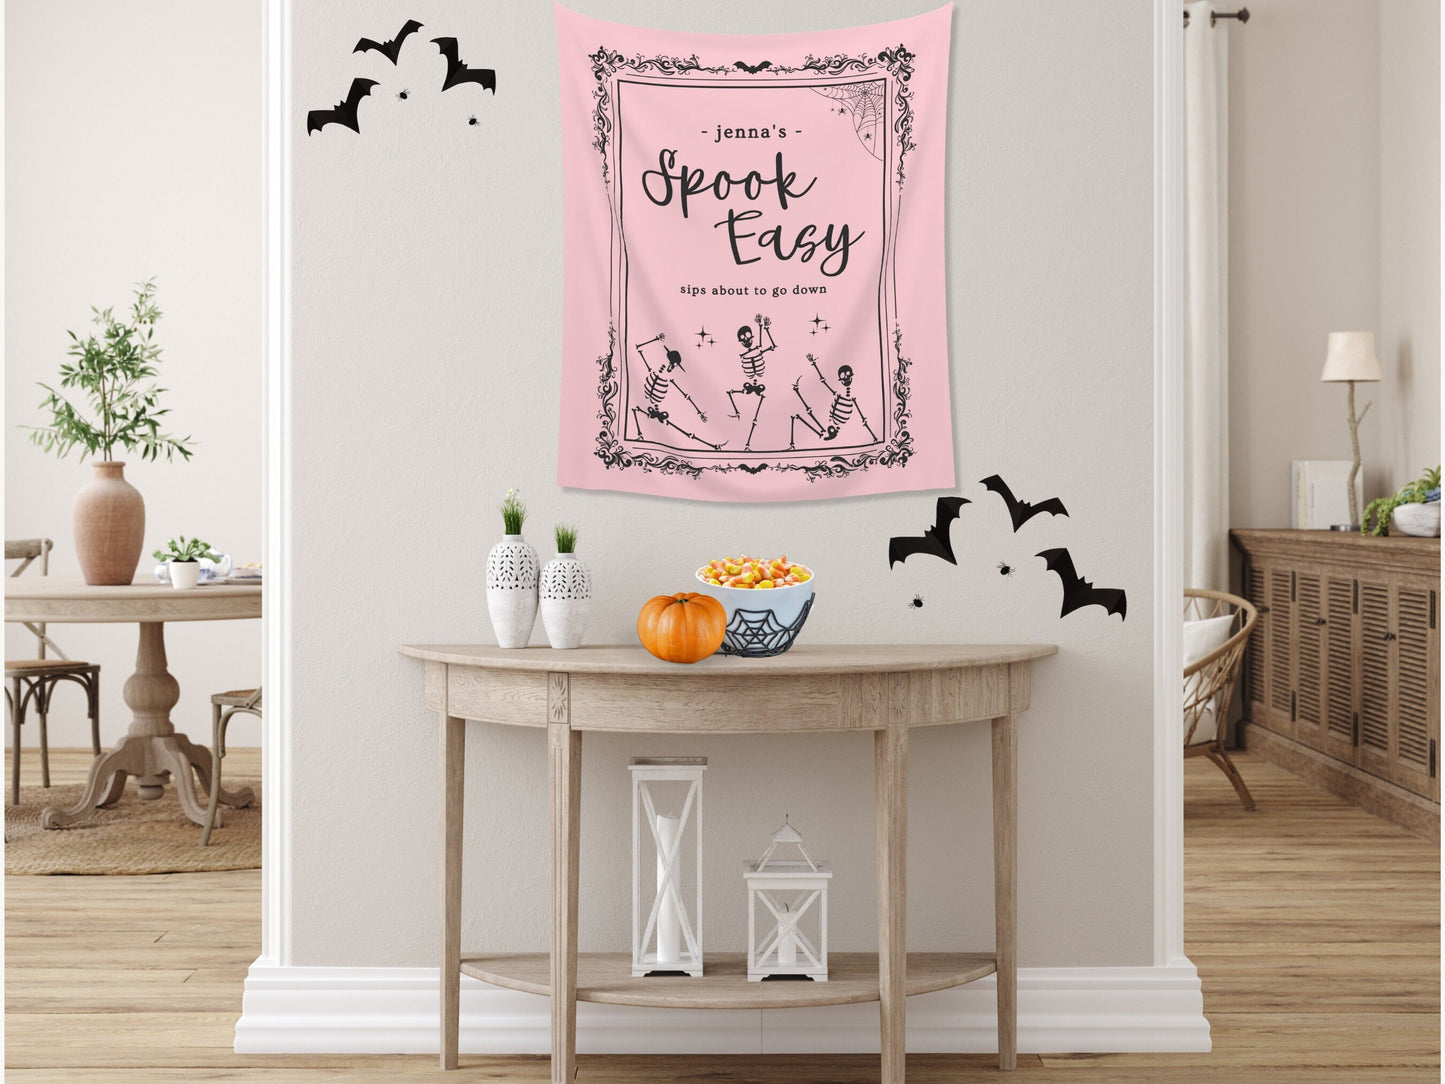 Custom Name Spook Easy Banner Birthday Party - 21st Birthday, 30th Birthday, 40th Birthday, 50th Birthday - Pink and Black - October Halloween Party Décor - Custom Backdrop